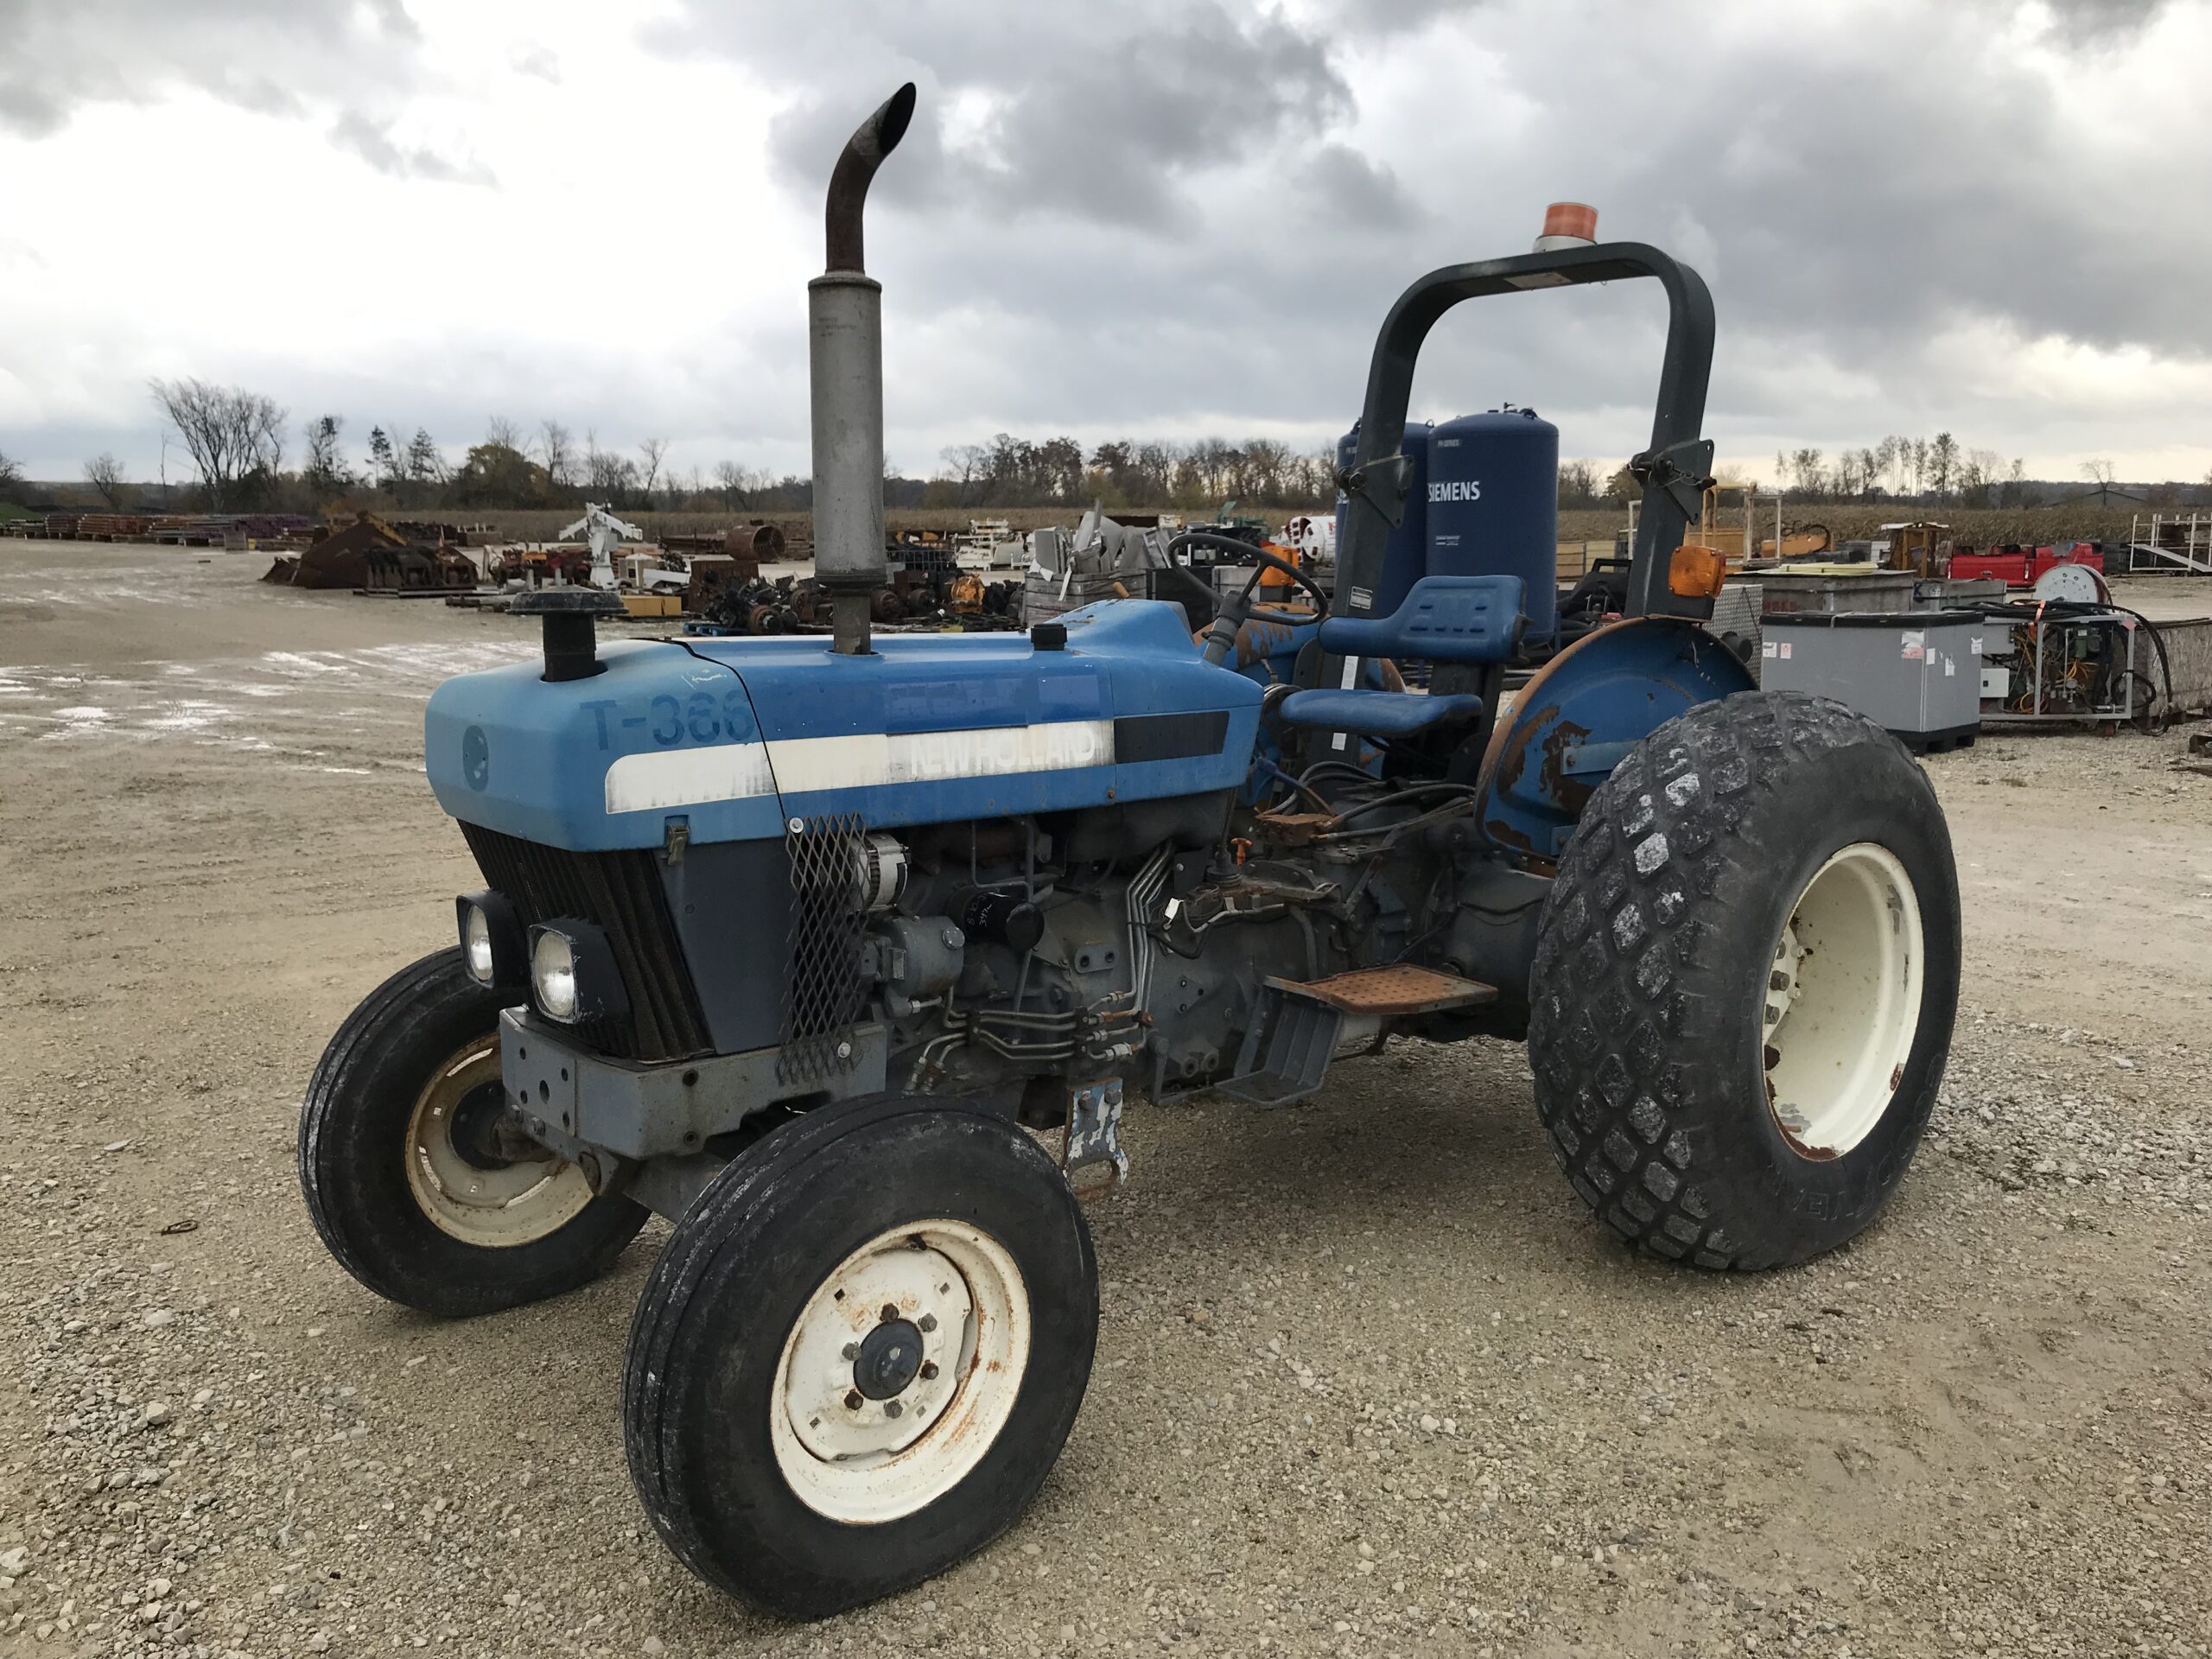 2000 New Holland 3930 Tractor